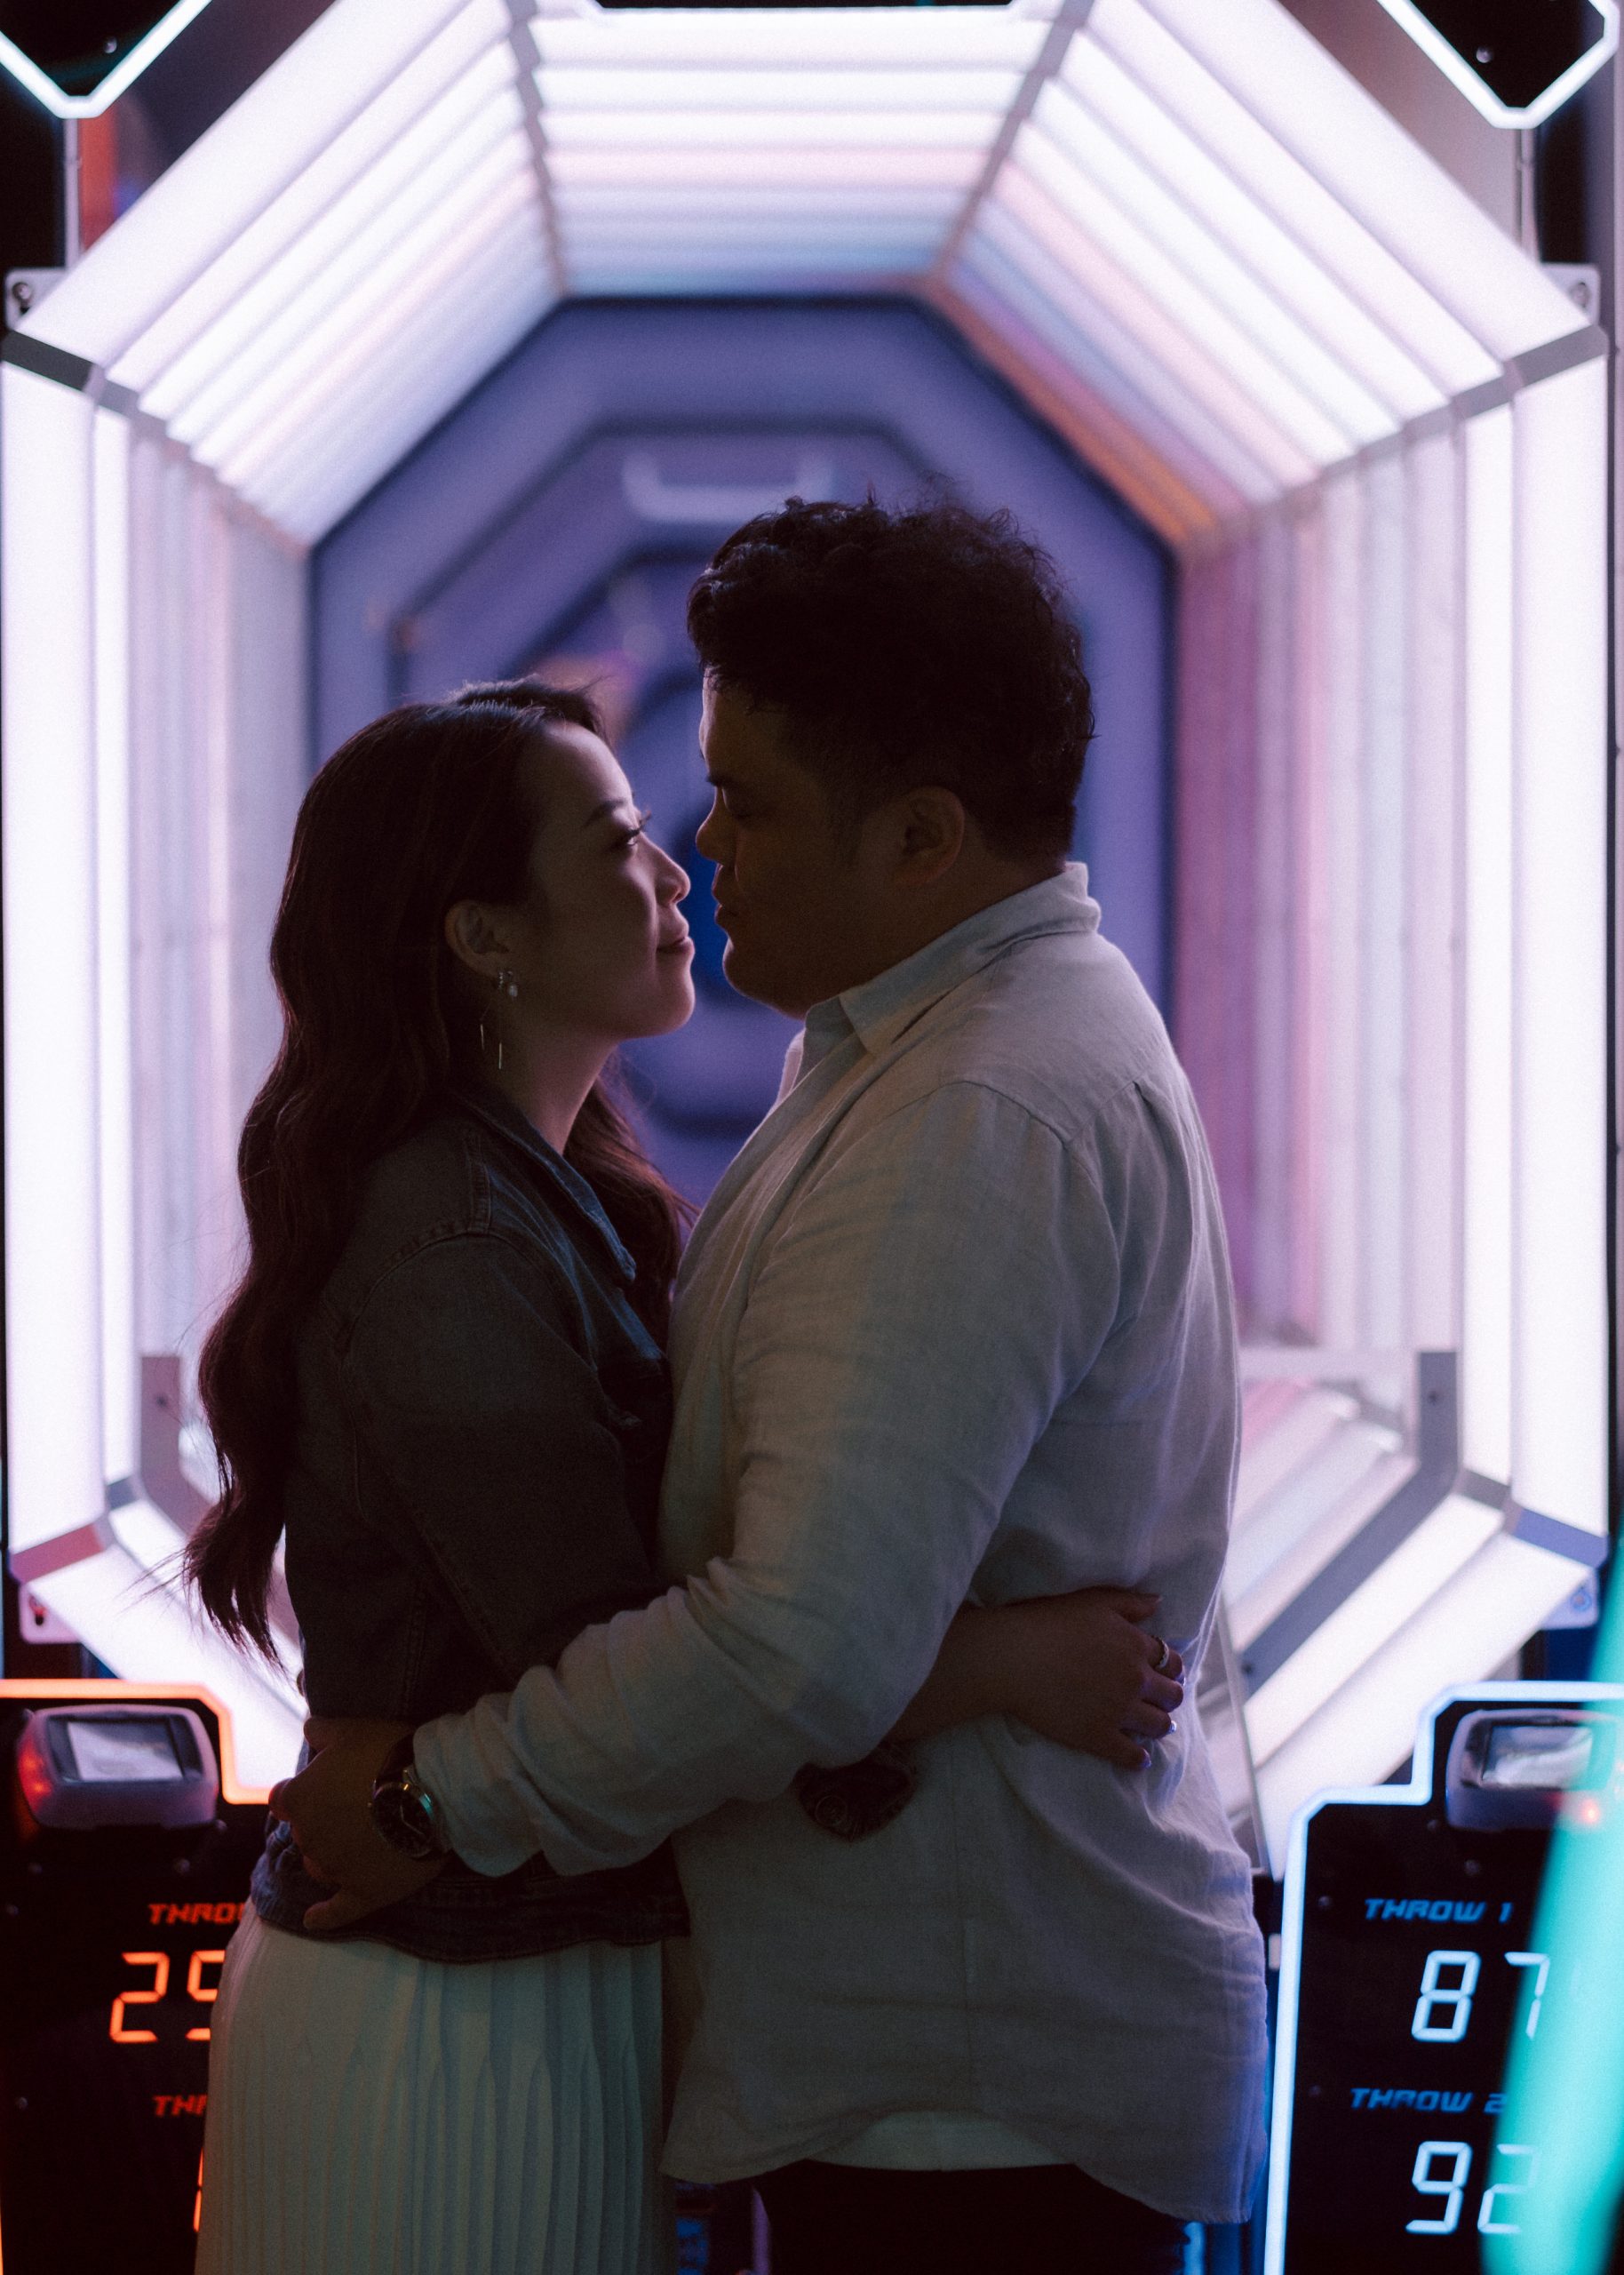 Couple surrounded by pink, blue and purple neon lighting.